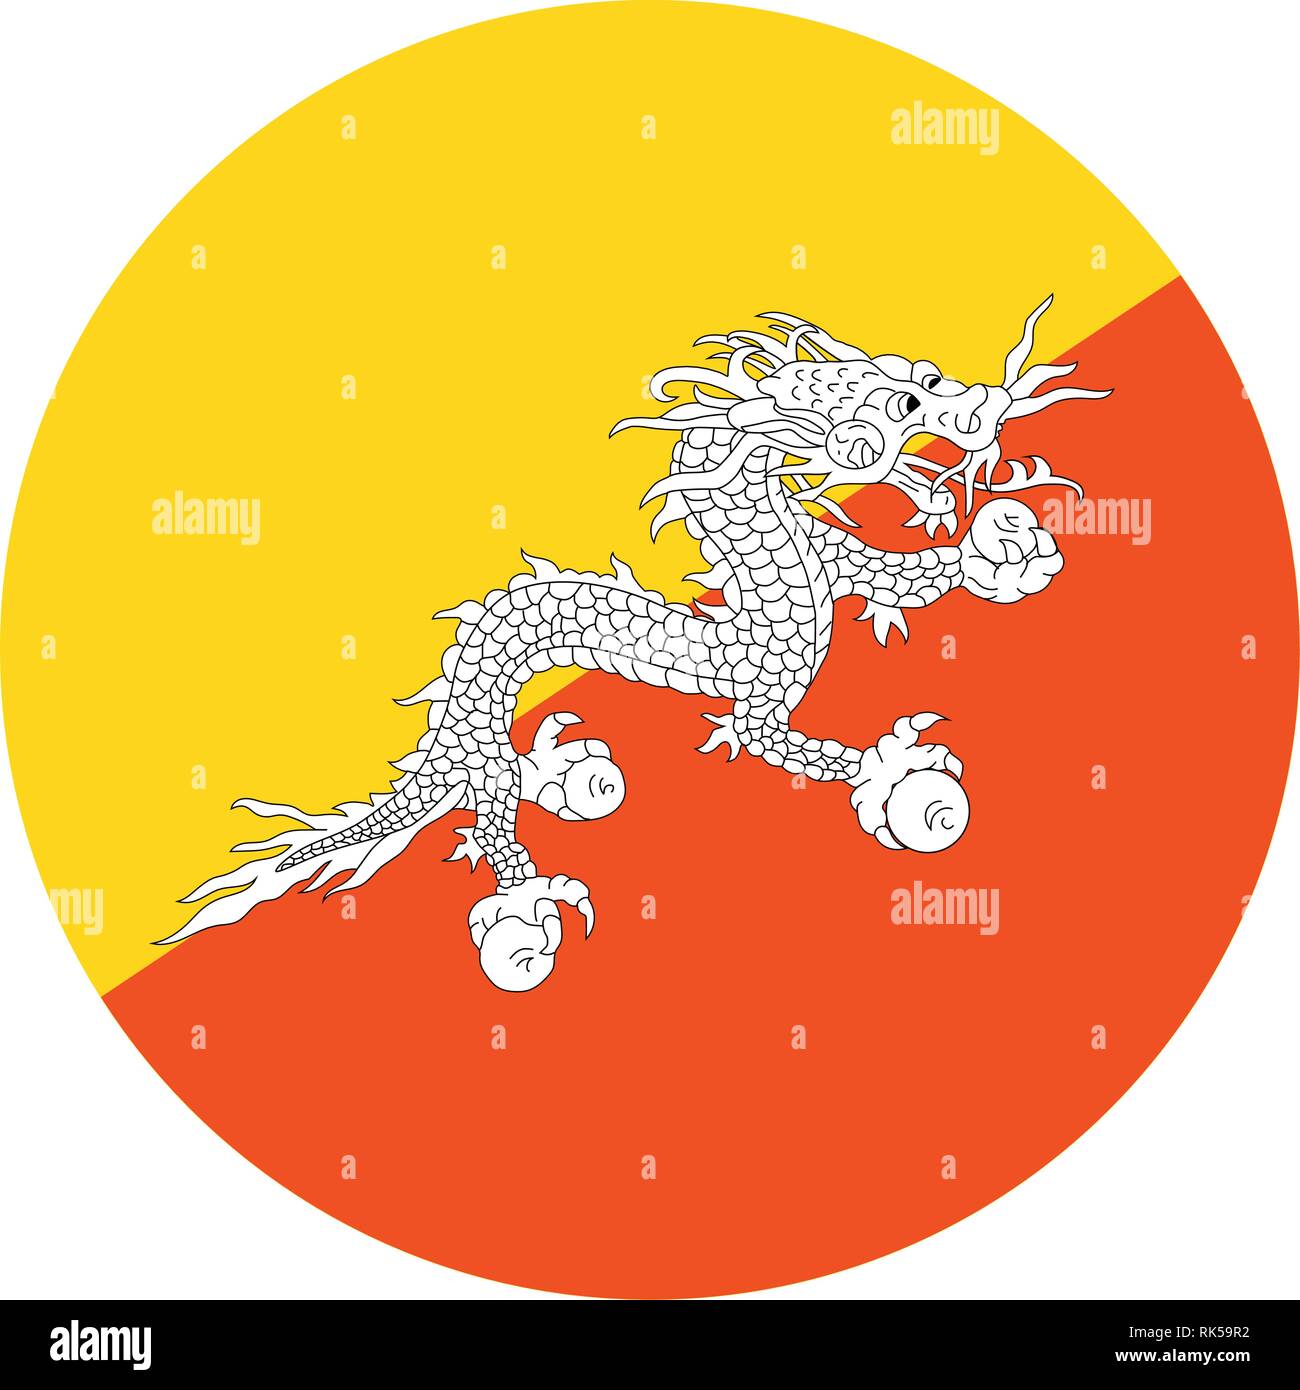 1,797 S Shaped Dragon Images, Stock Photos, 3D objects, & Vectors